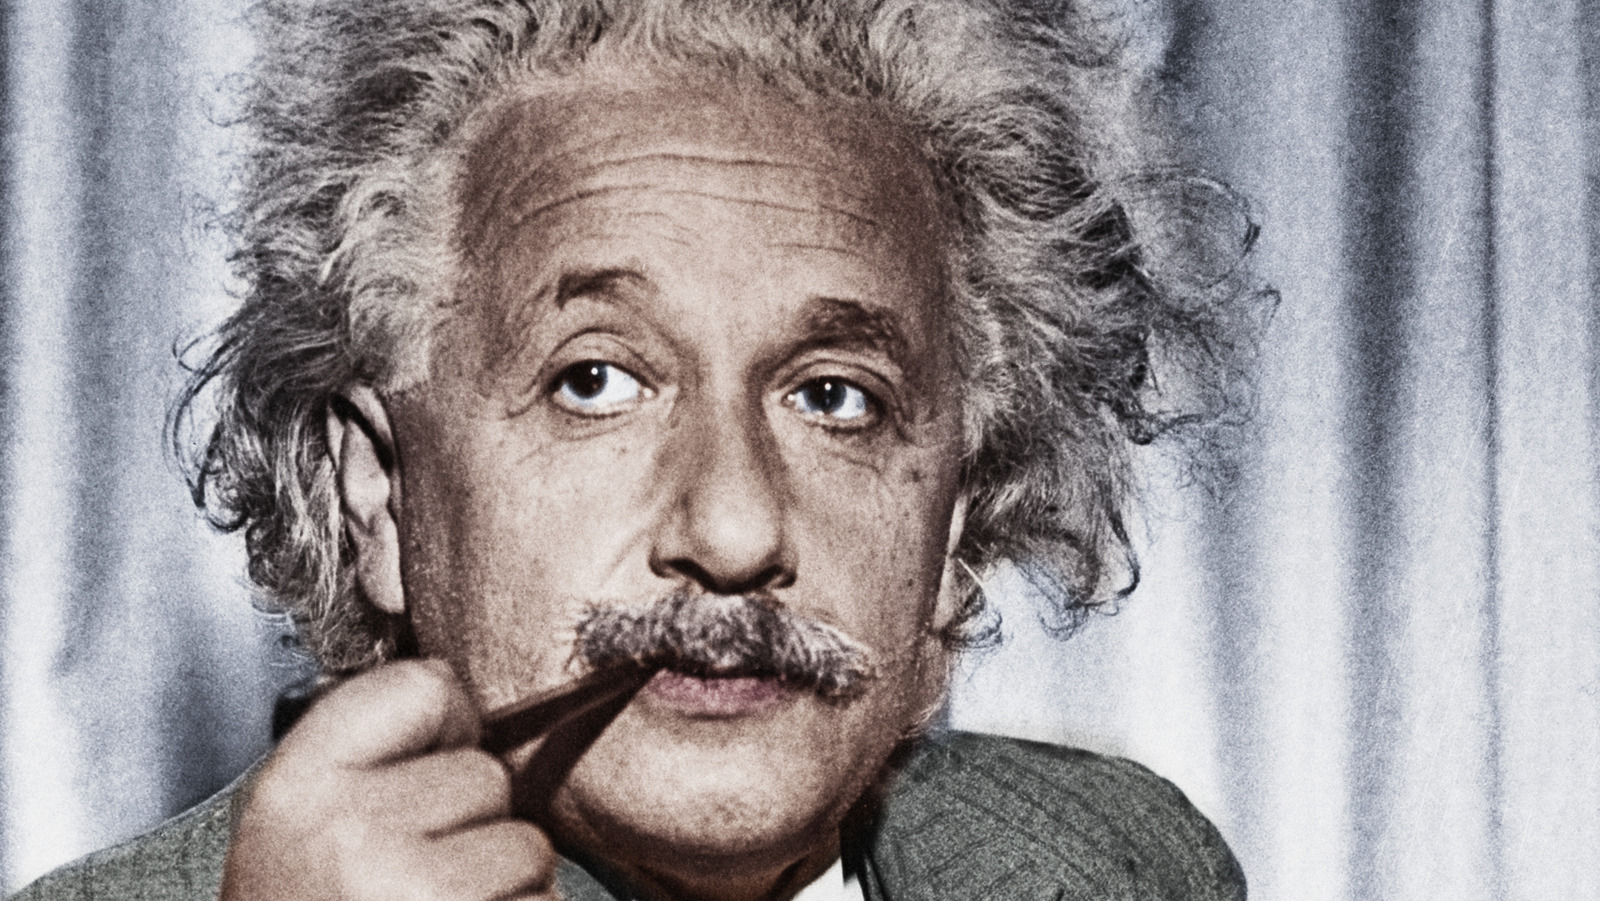 This Body Part Of Albert Einstein Was Hijacked After He Died